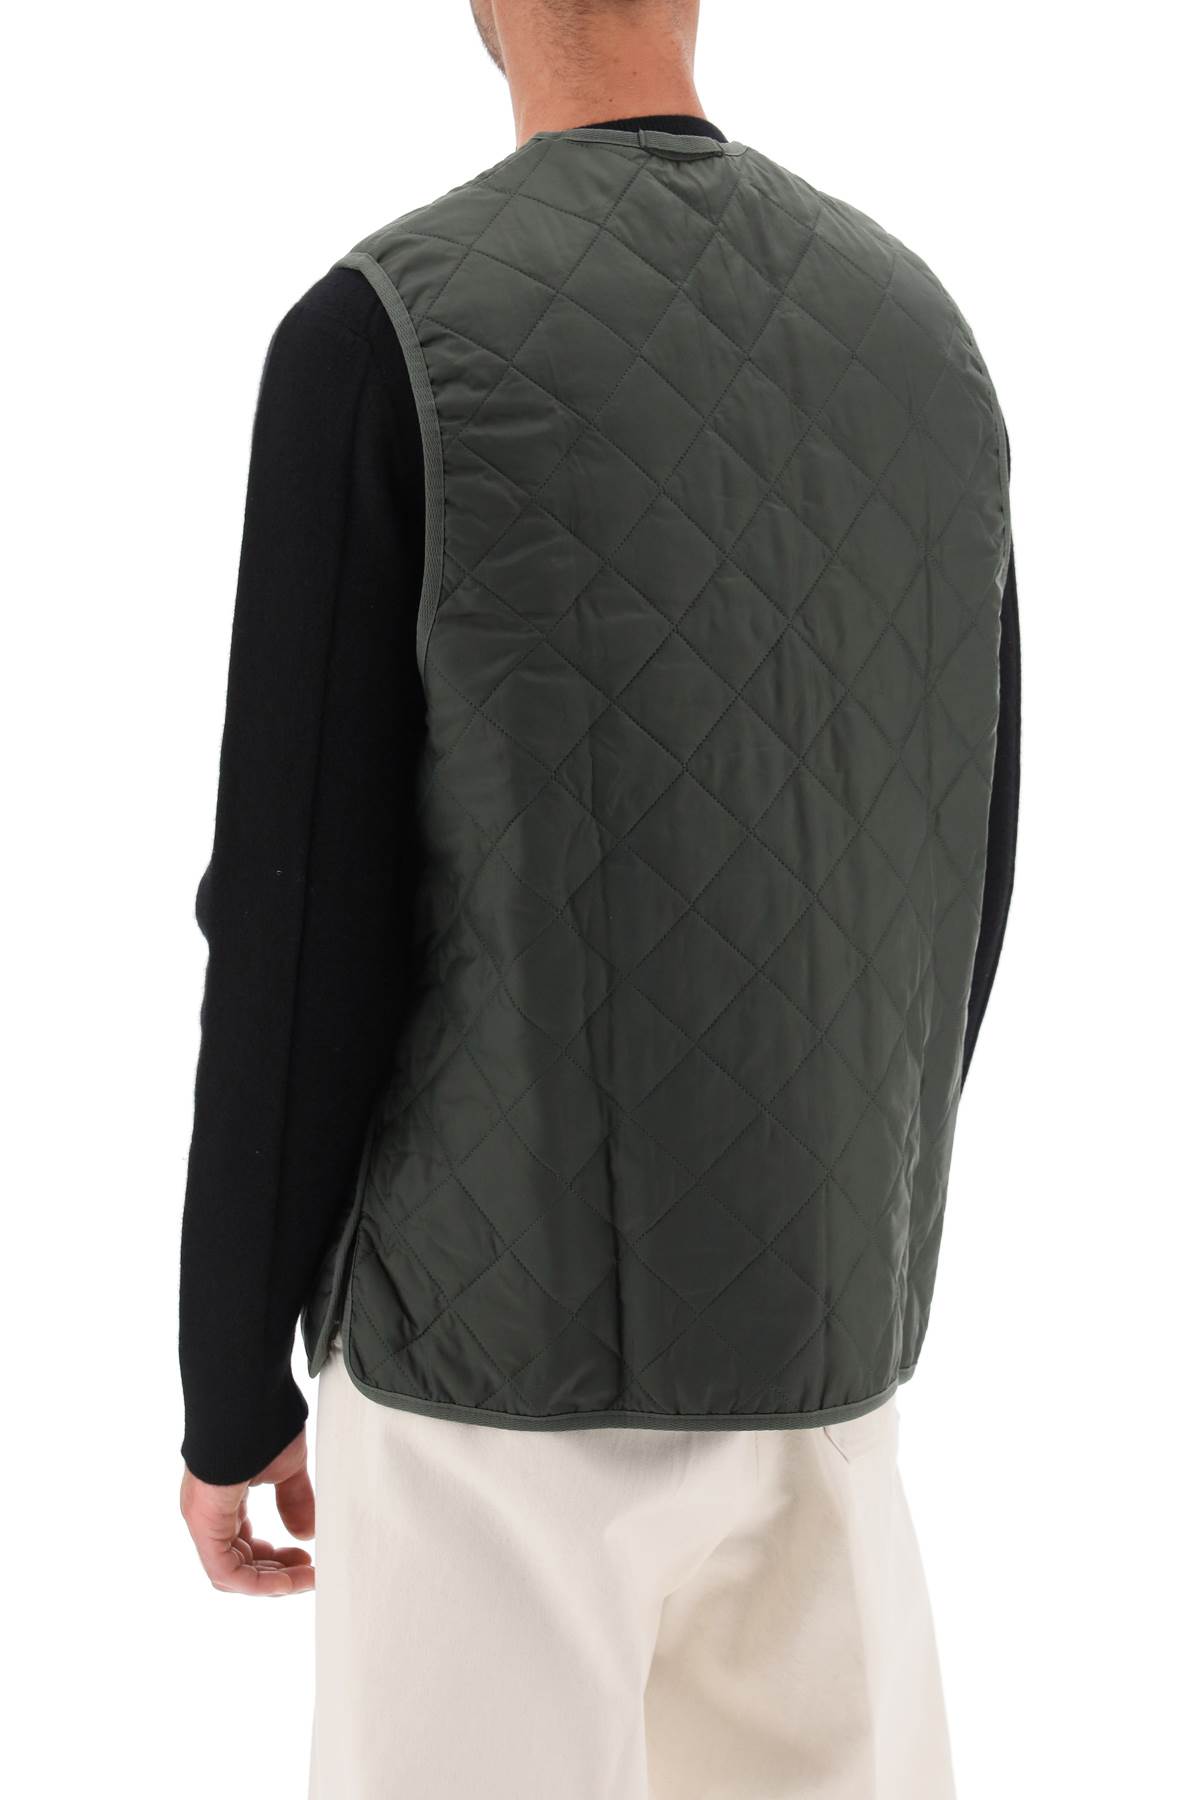 Shop Barbour Quilted Vest In Olive Classic